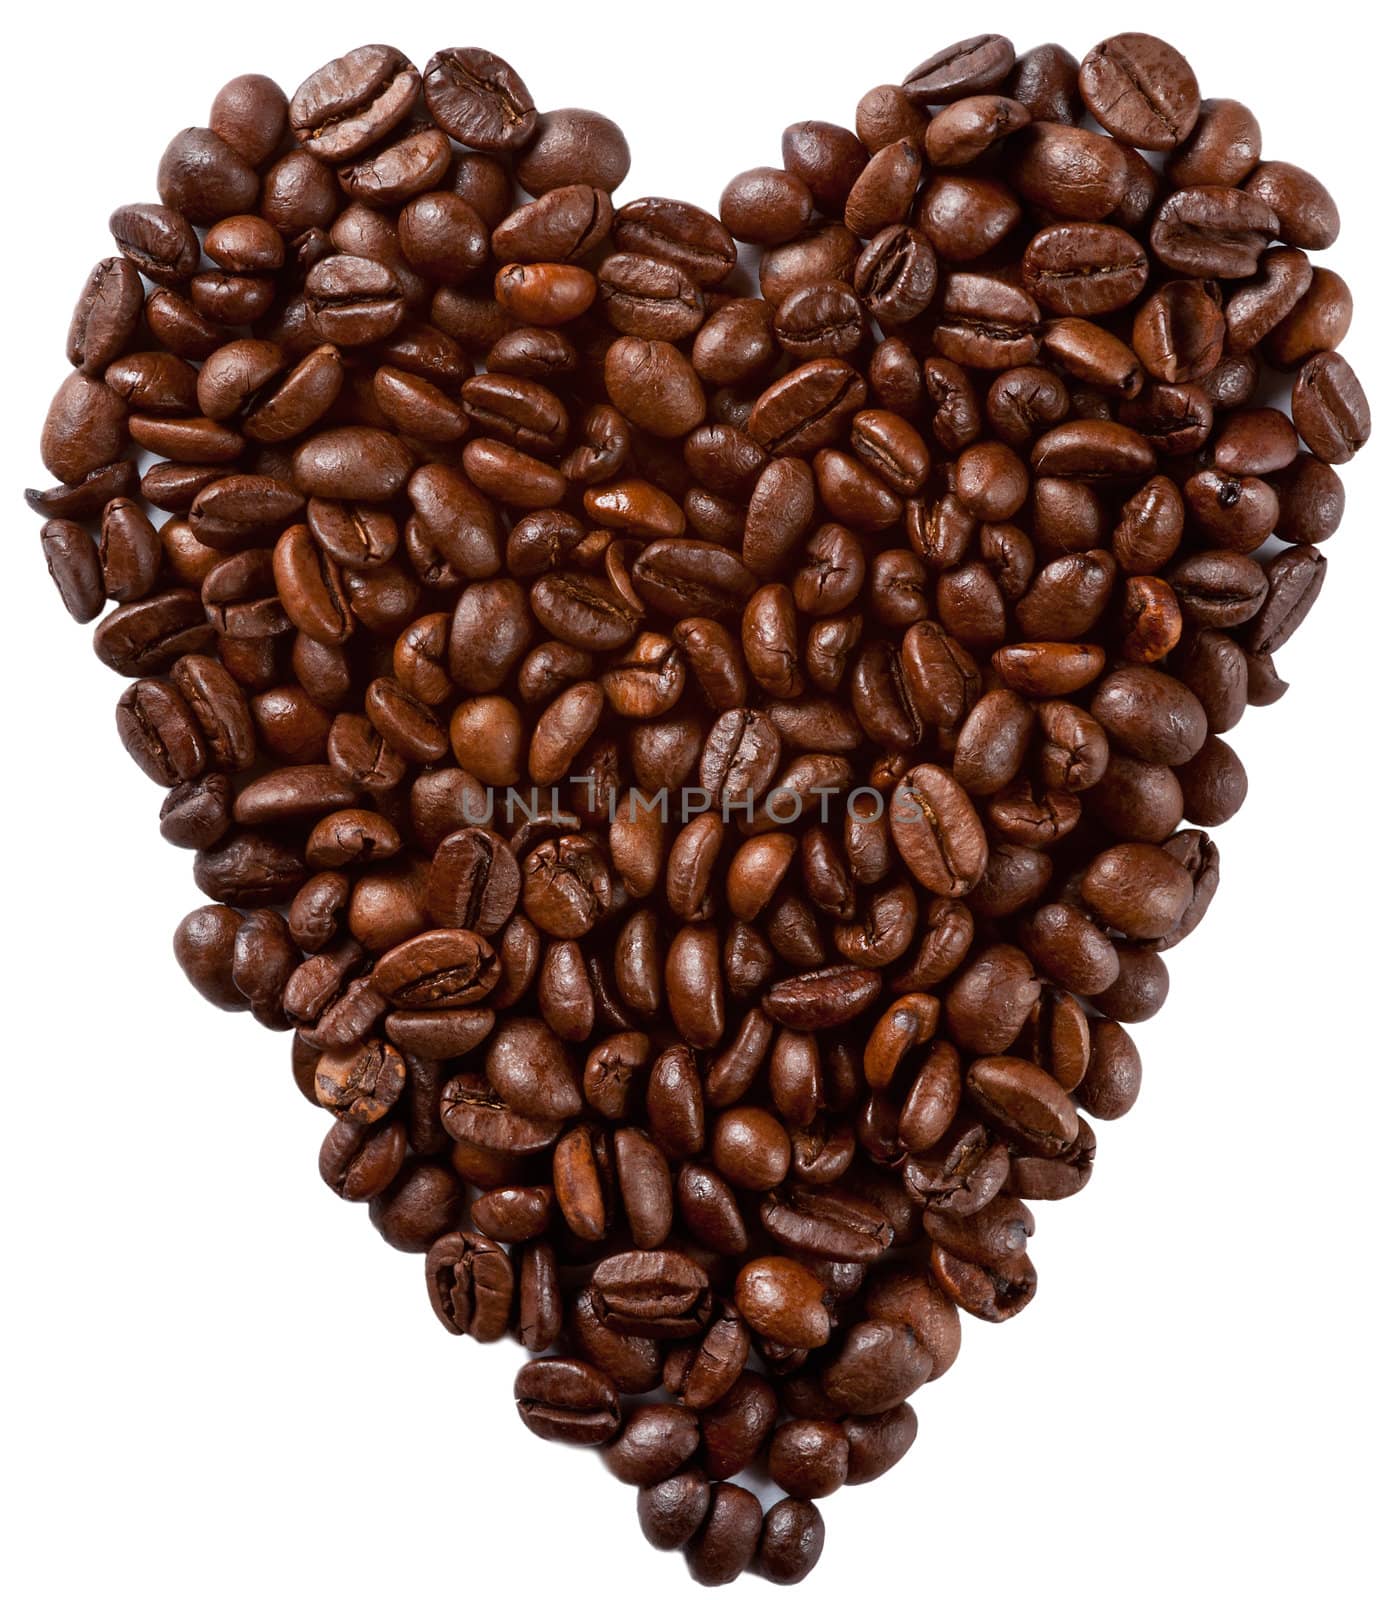 Coffee beans heart shaped and isolated in a white background
